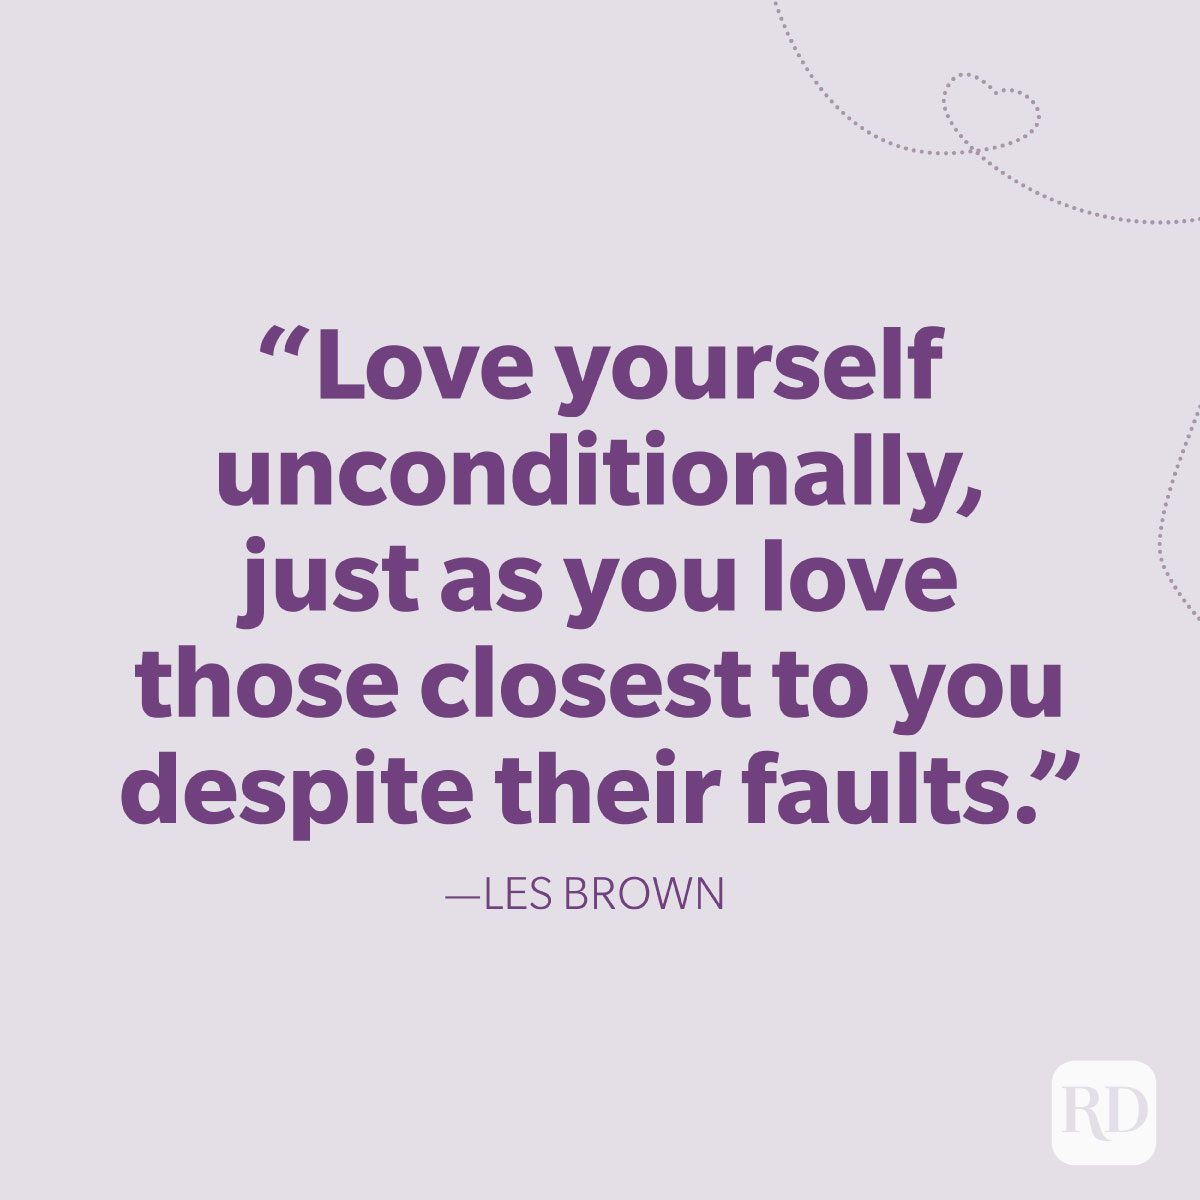 40 Self-Love Quotes: Beautiful and Inspiring Quotes to Read